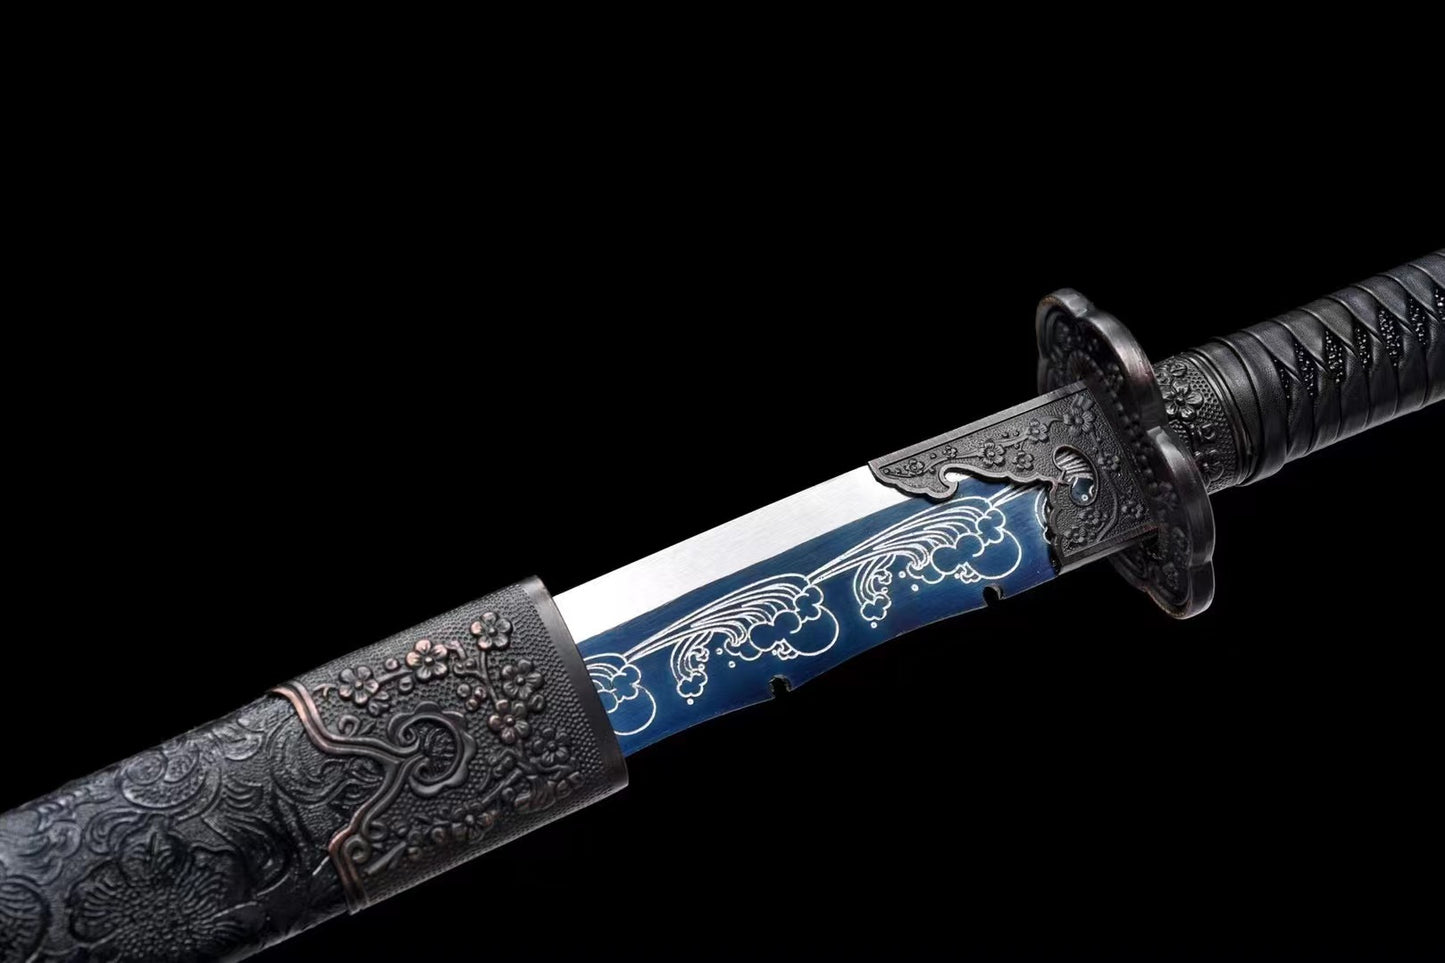 Chengfeng Embroidered Spring Knife-乘风绣春刀